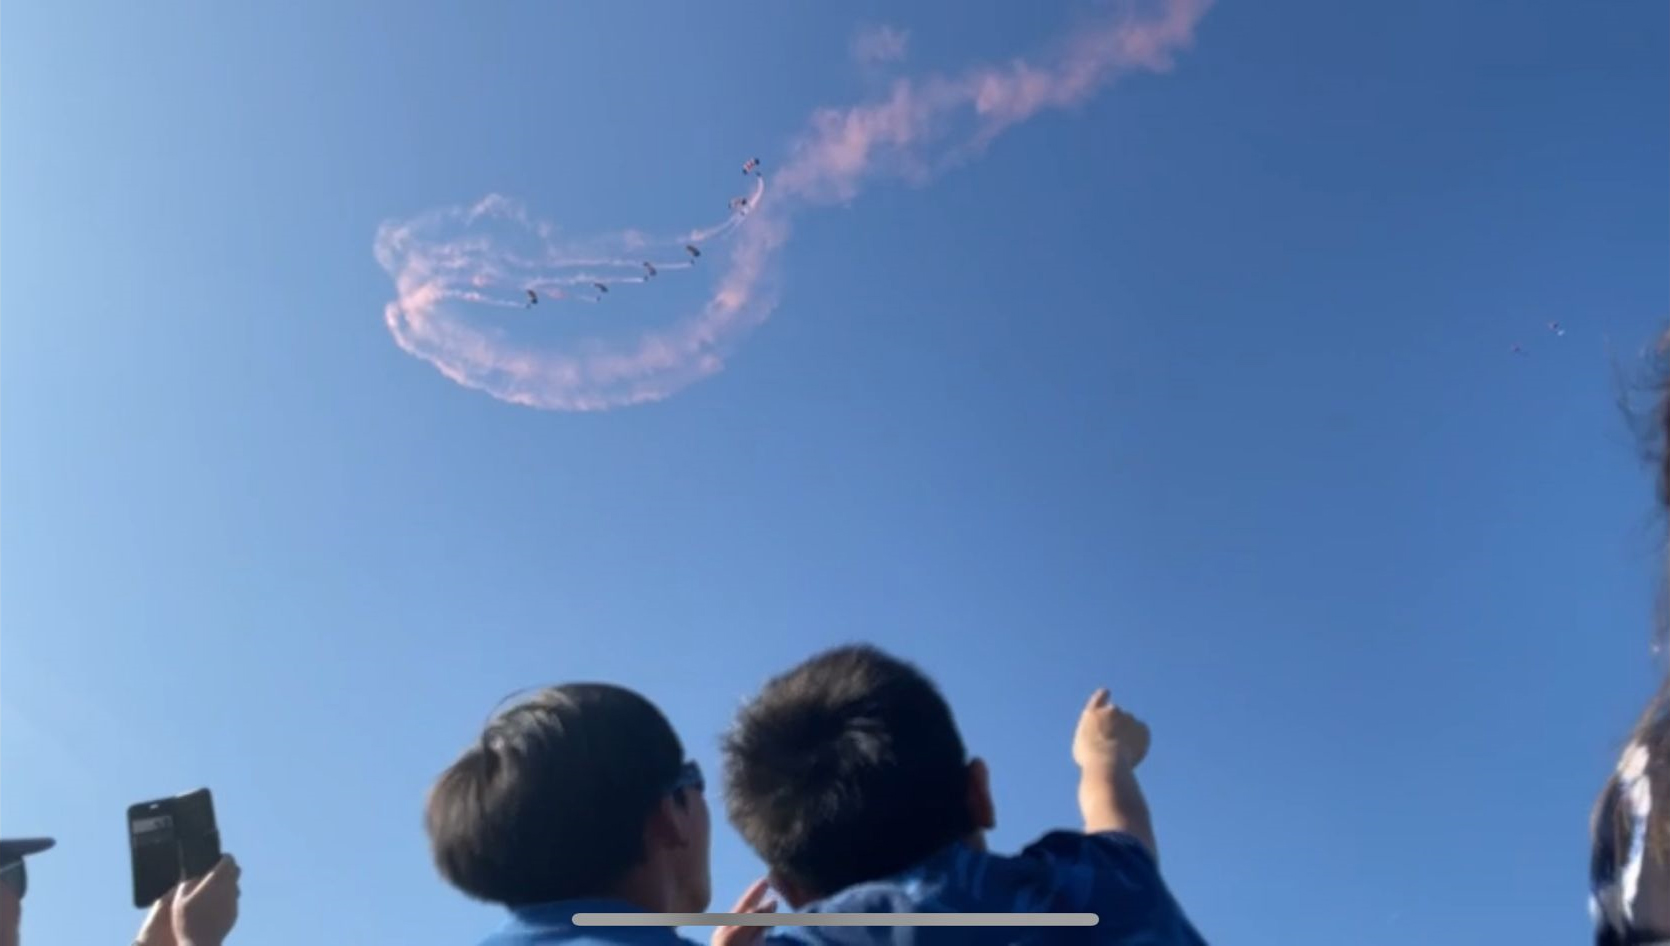 In the stunning sun-drenched grounds of Ragley Hall Estate, Alcester, the RAF Falcons, the UK’s premier military parachute display team, delighted the crowd with their spectacular display.